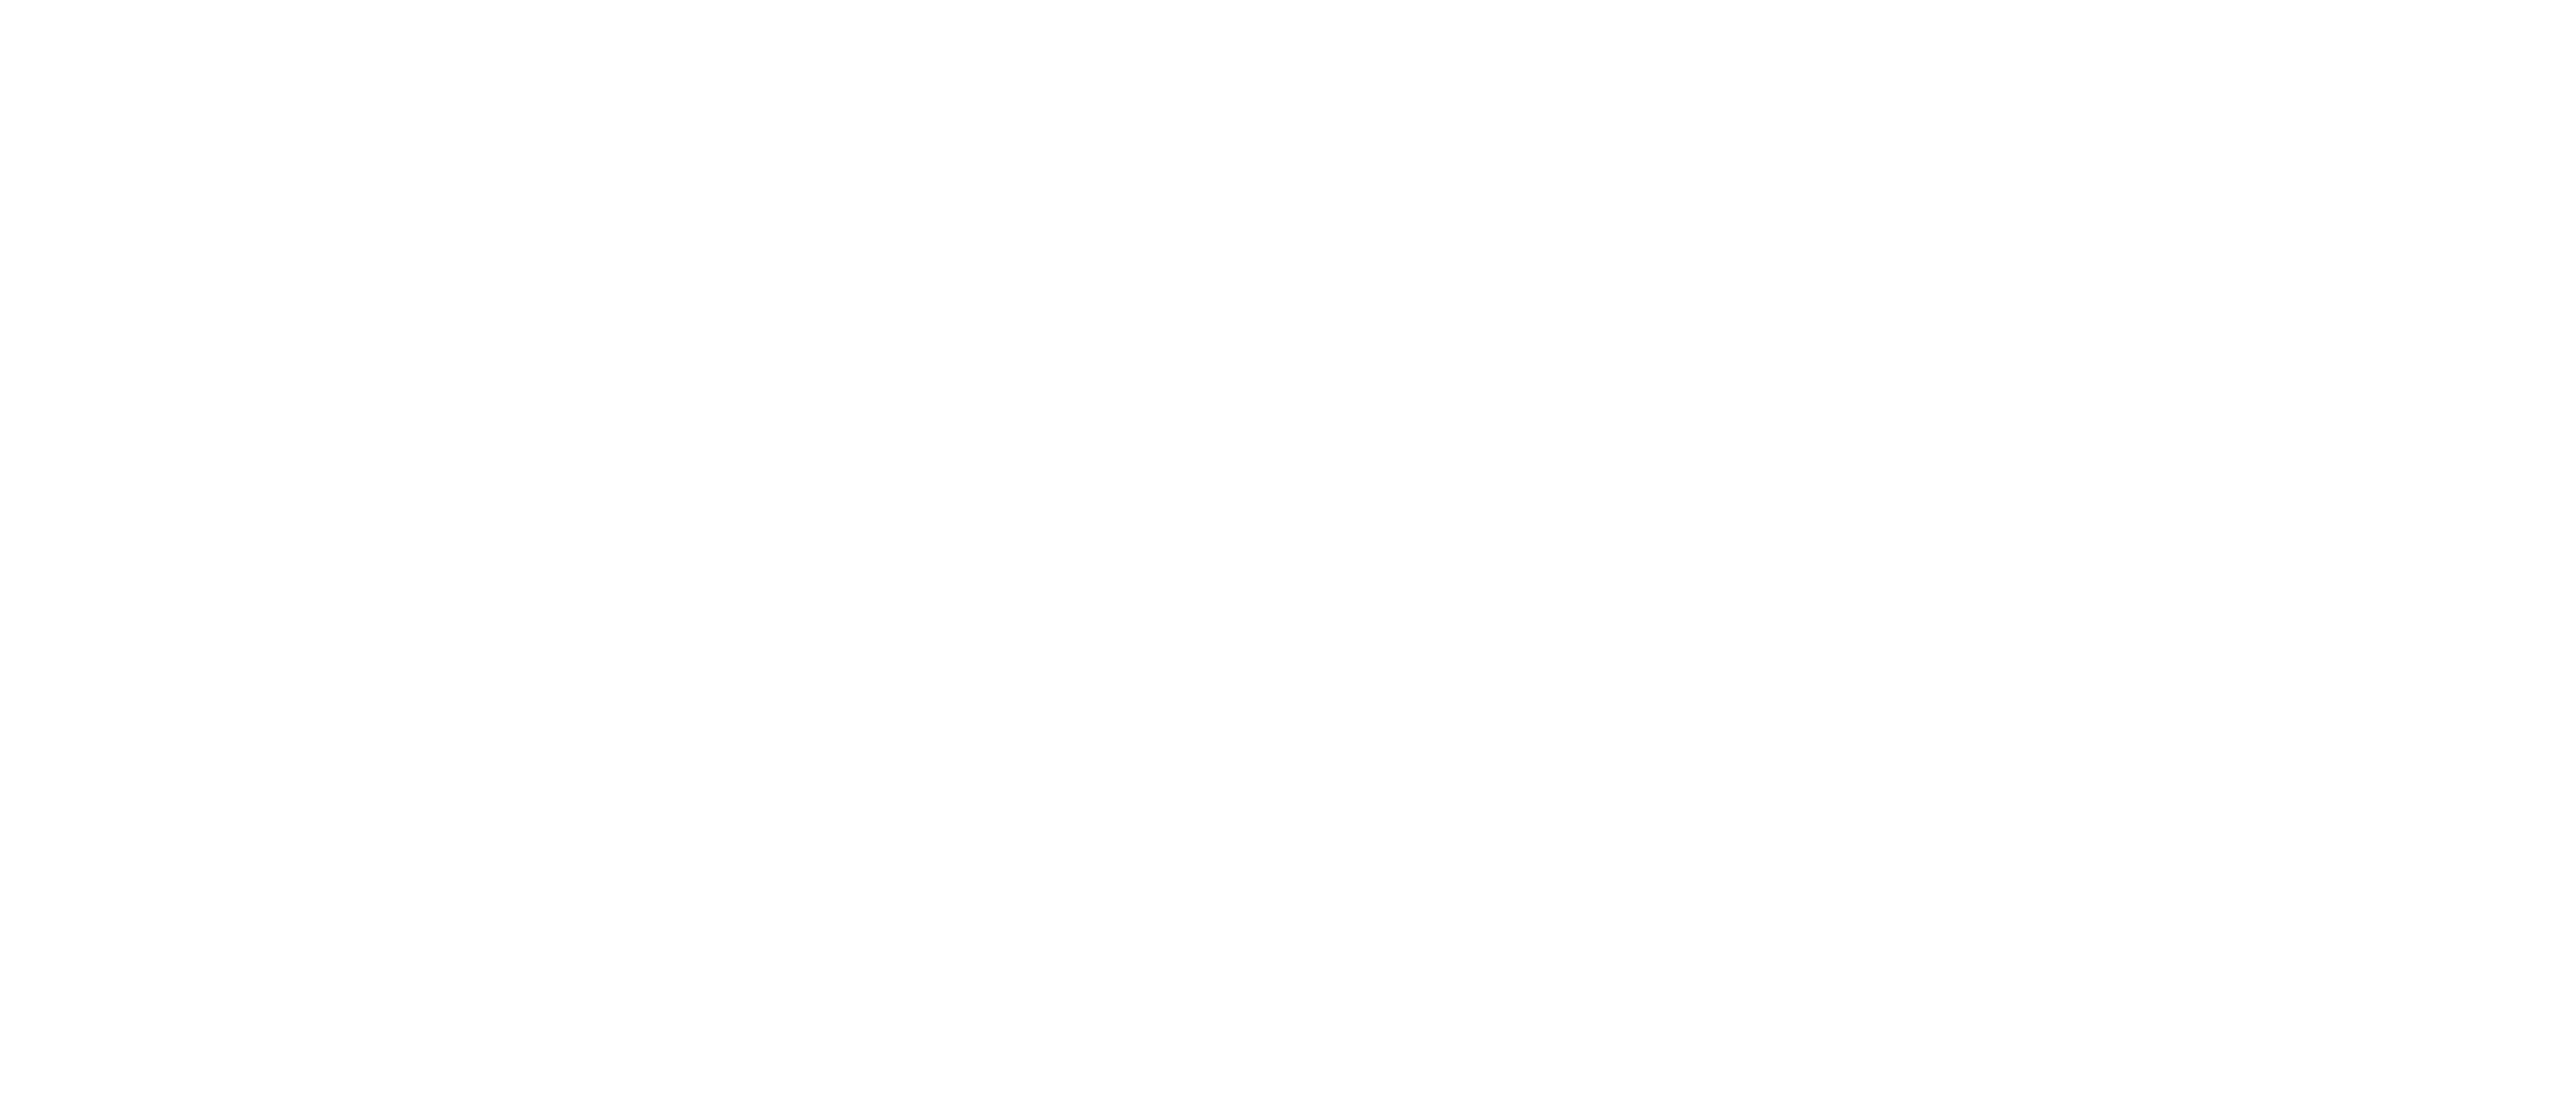 Logo of the Royal Netherlands Air Force